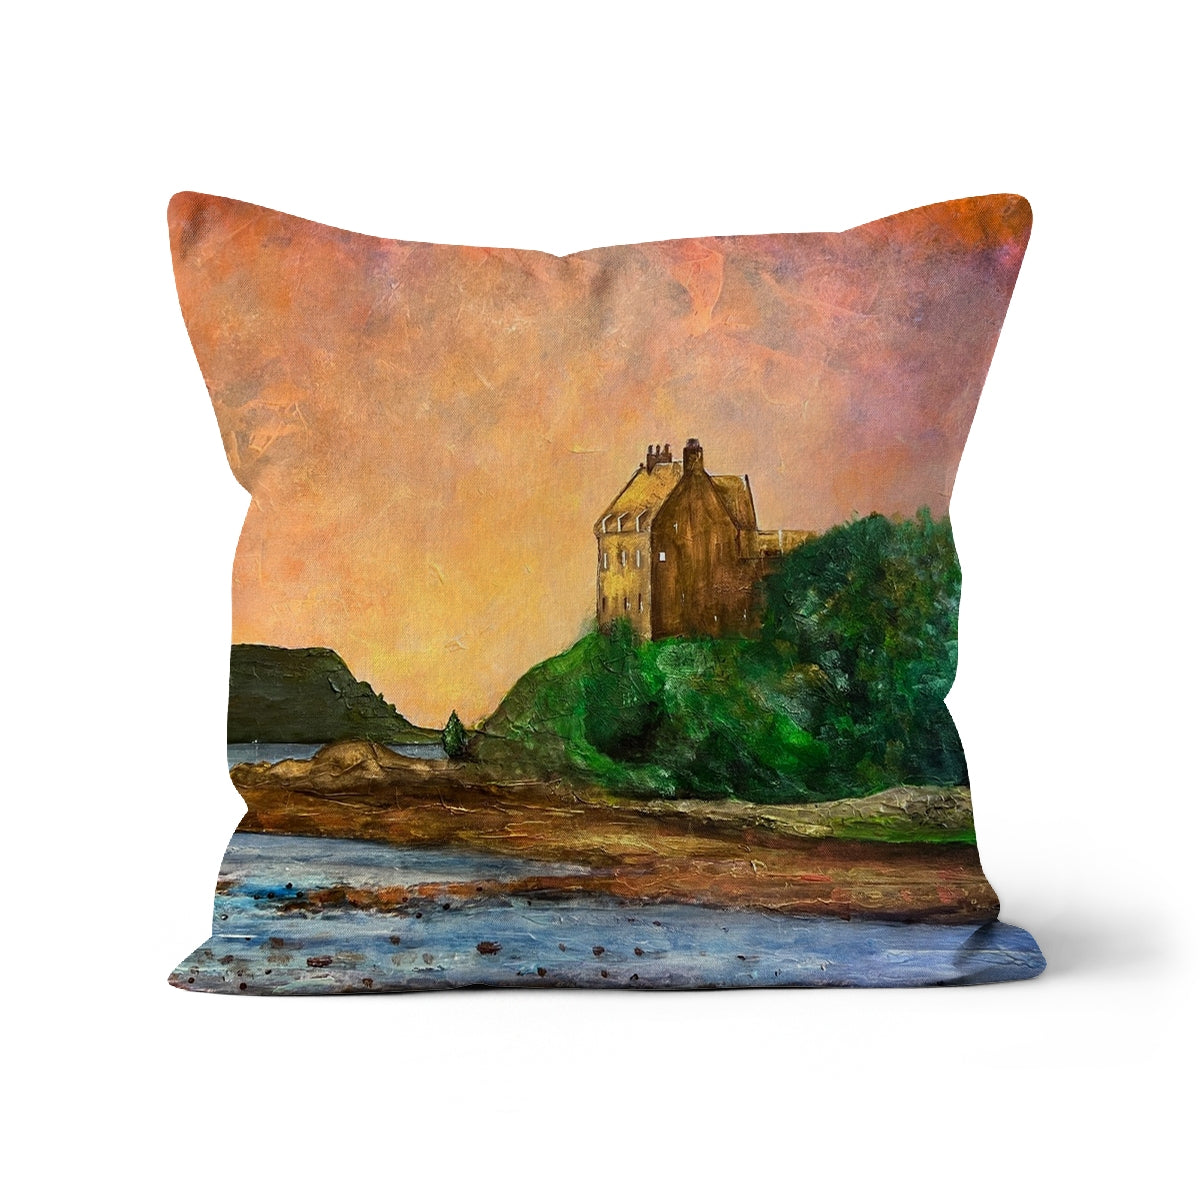 Duntrune Castle Art Gifts Cushion-Cushions-Historic & Iconic Scotland Art Gallery-Faux Suede-24"x24"-Paintings, Prints, Homeware, Art Gifts From Scotland By Scottish Artist Kevin Hunter